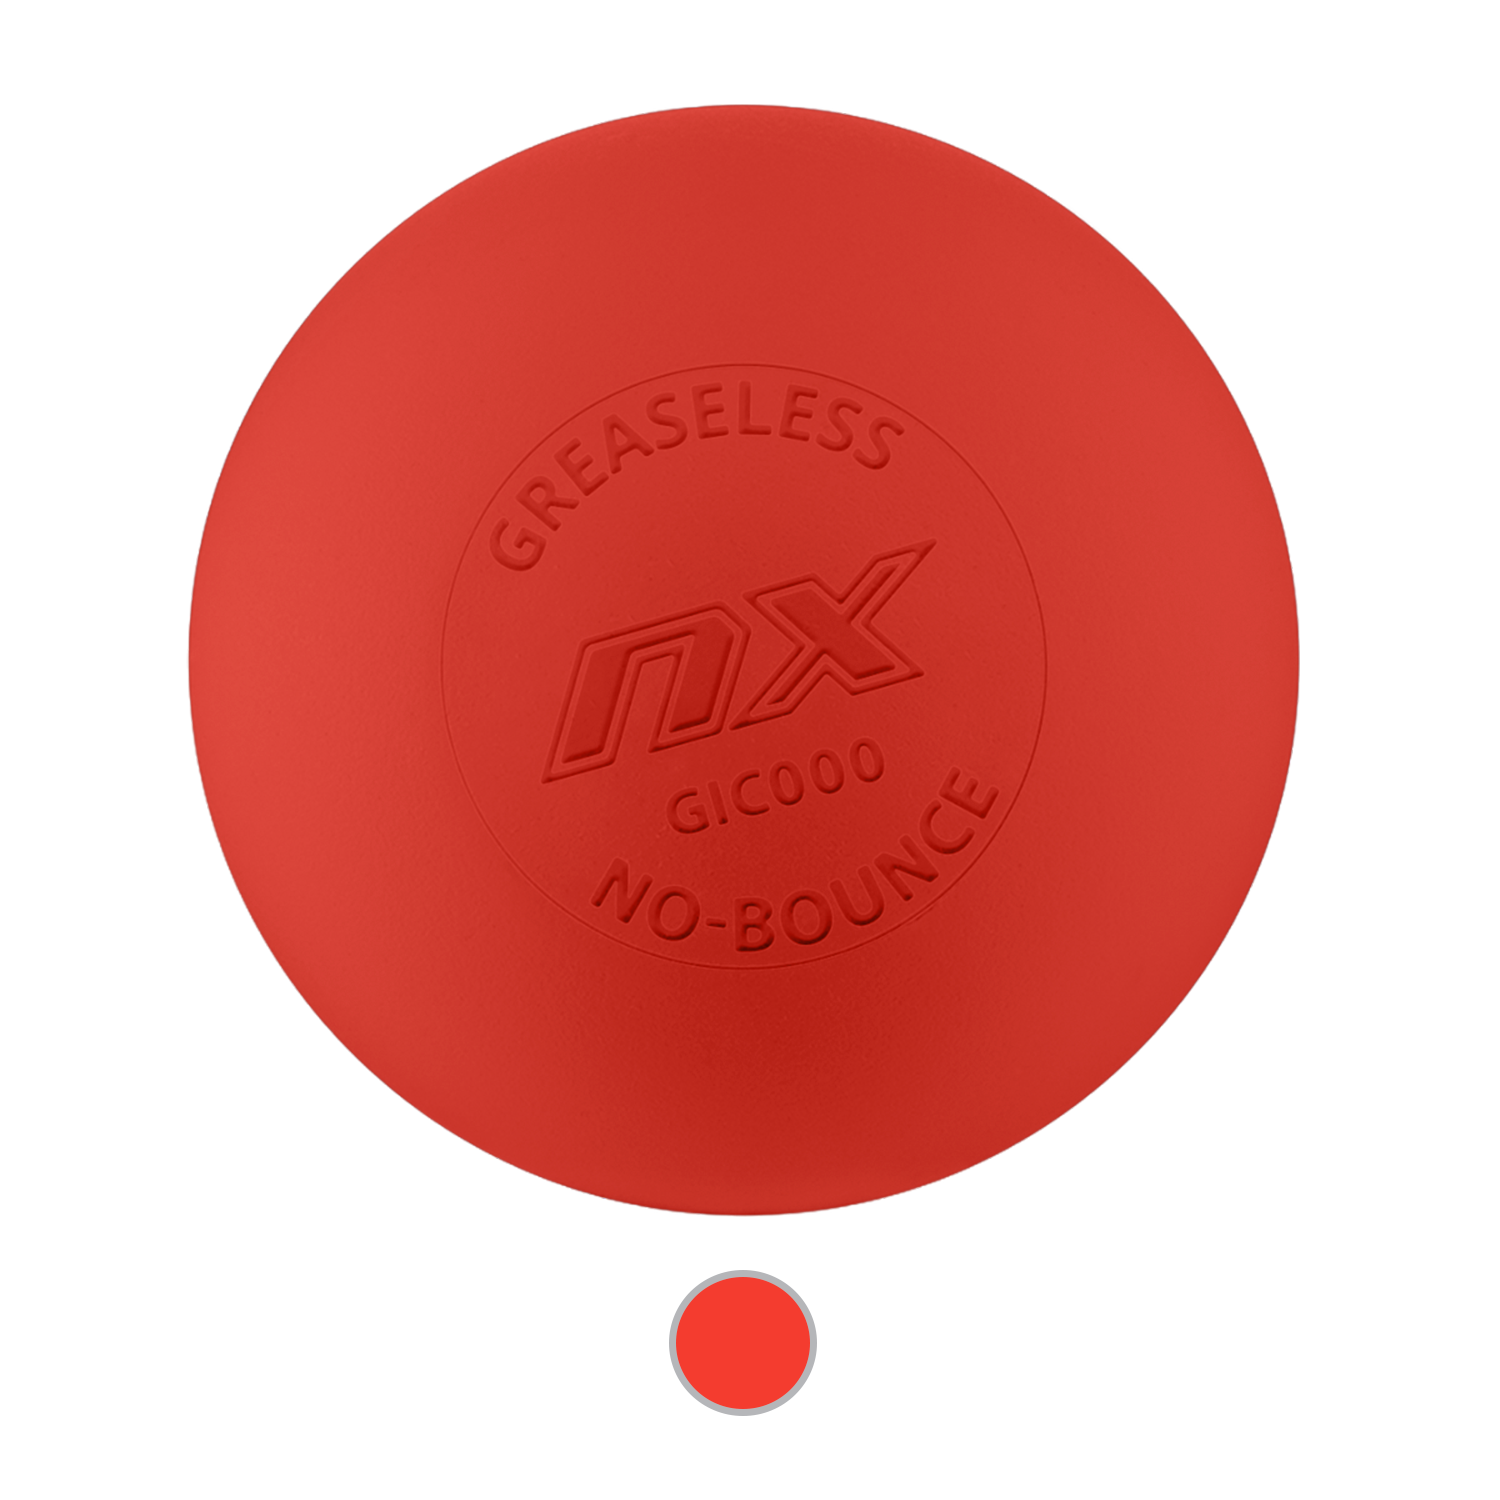 Red PEARL NX no bounce lacrosse balls